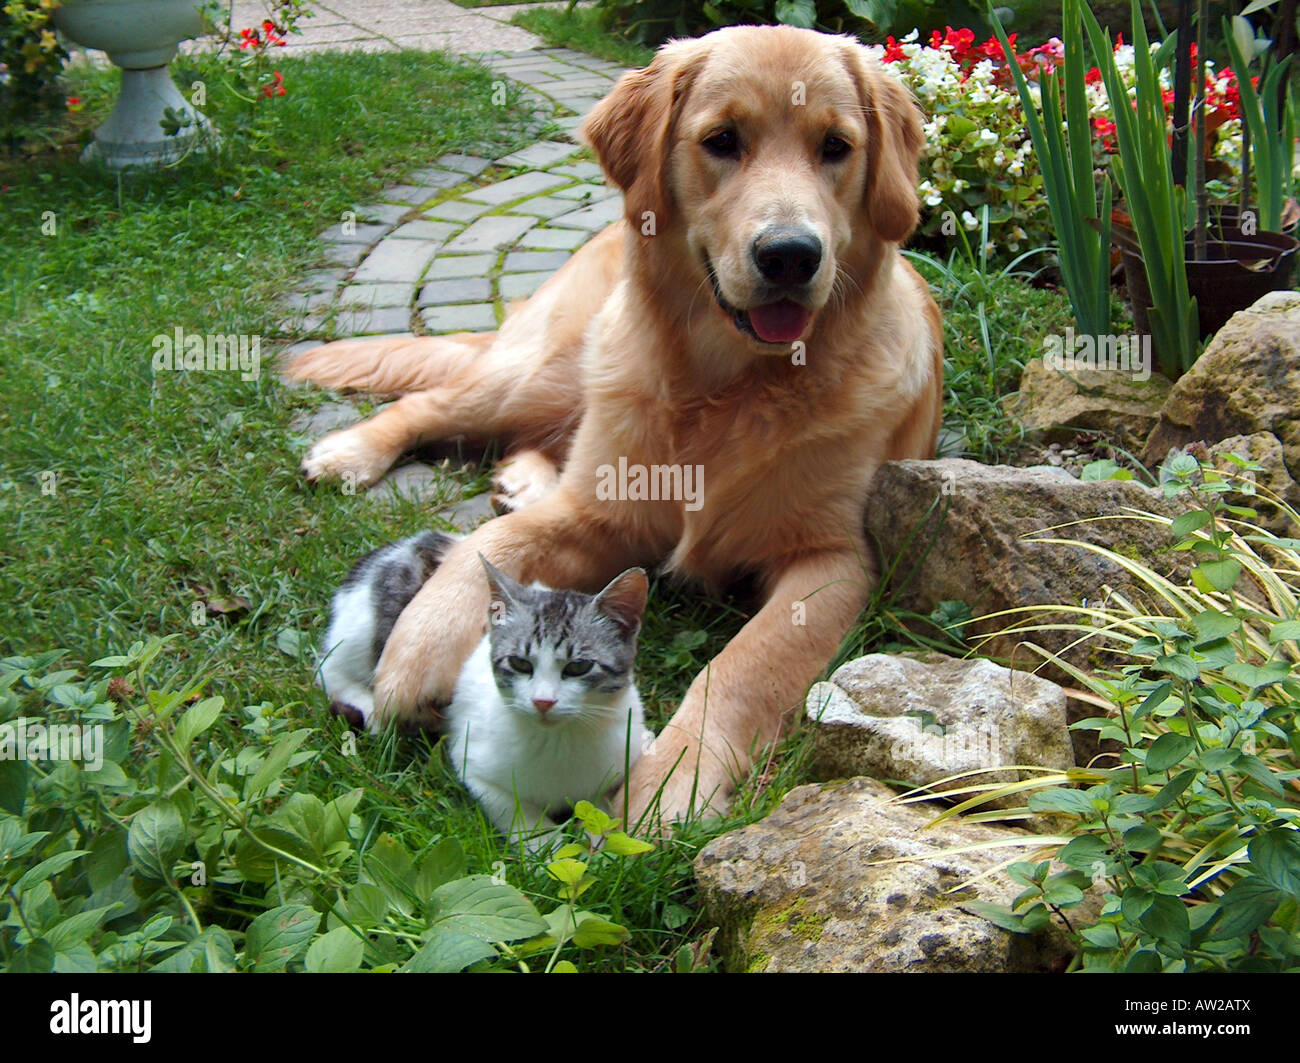 Best friends. Golden retriever and domestic cat. Stock Photo